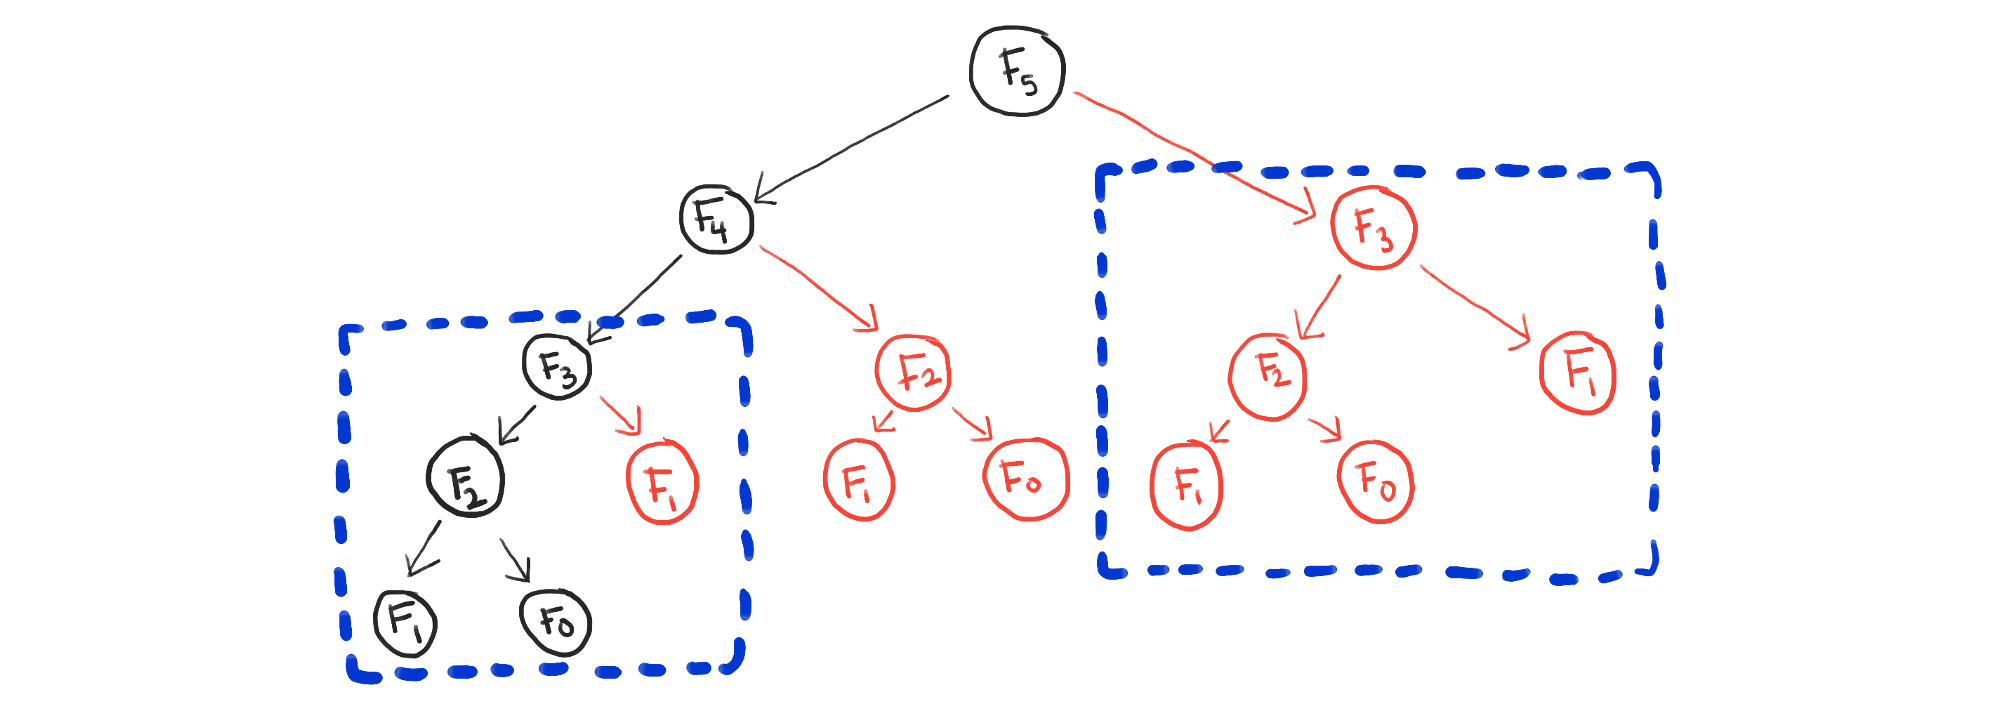 A tree structure for computing the Fibonacci numbers recursively, showing how the same subproblems are solved multiple times.